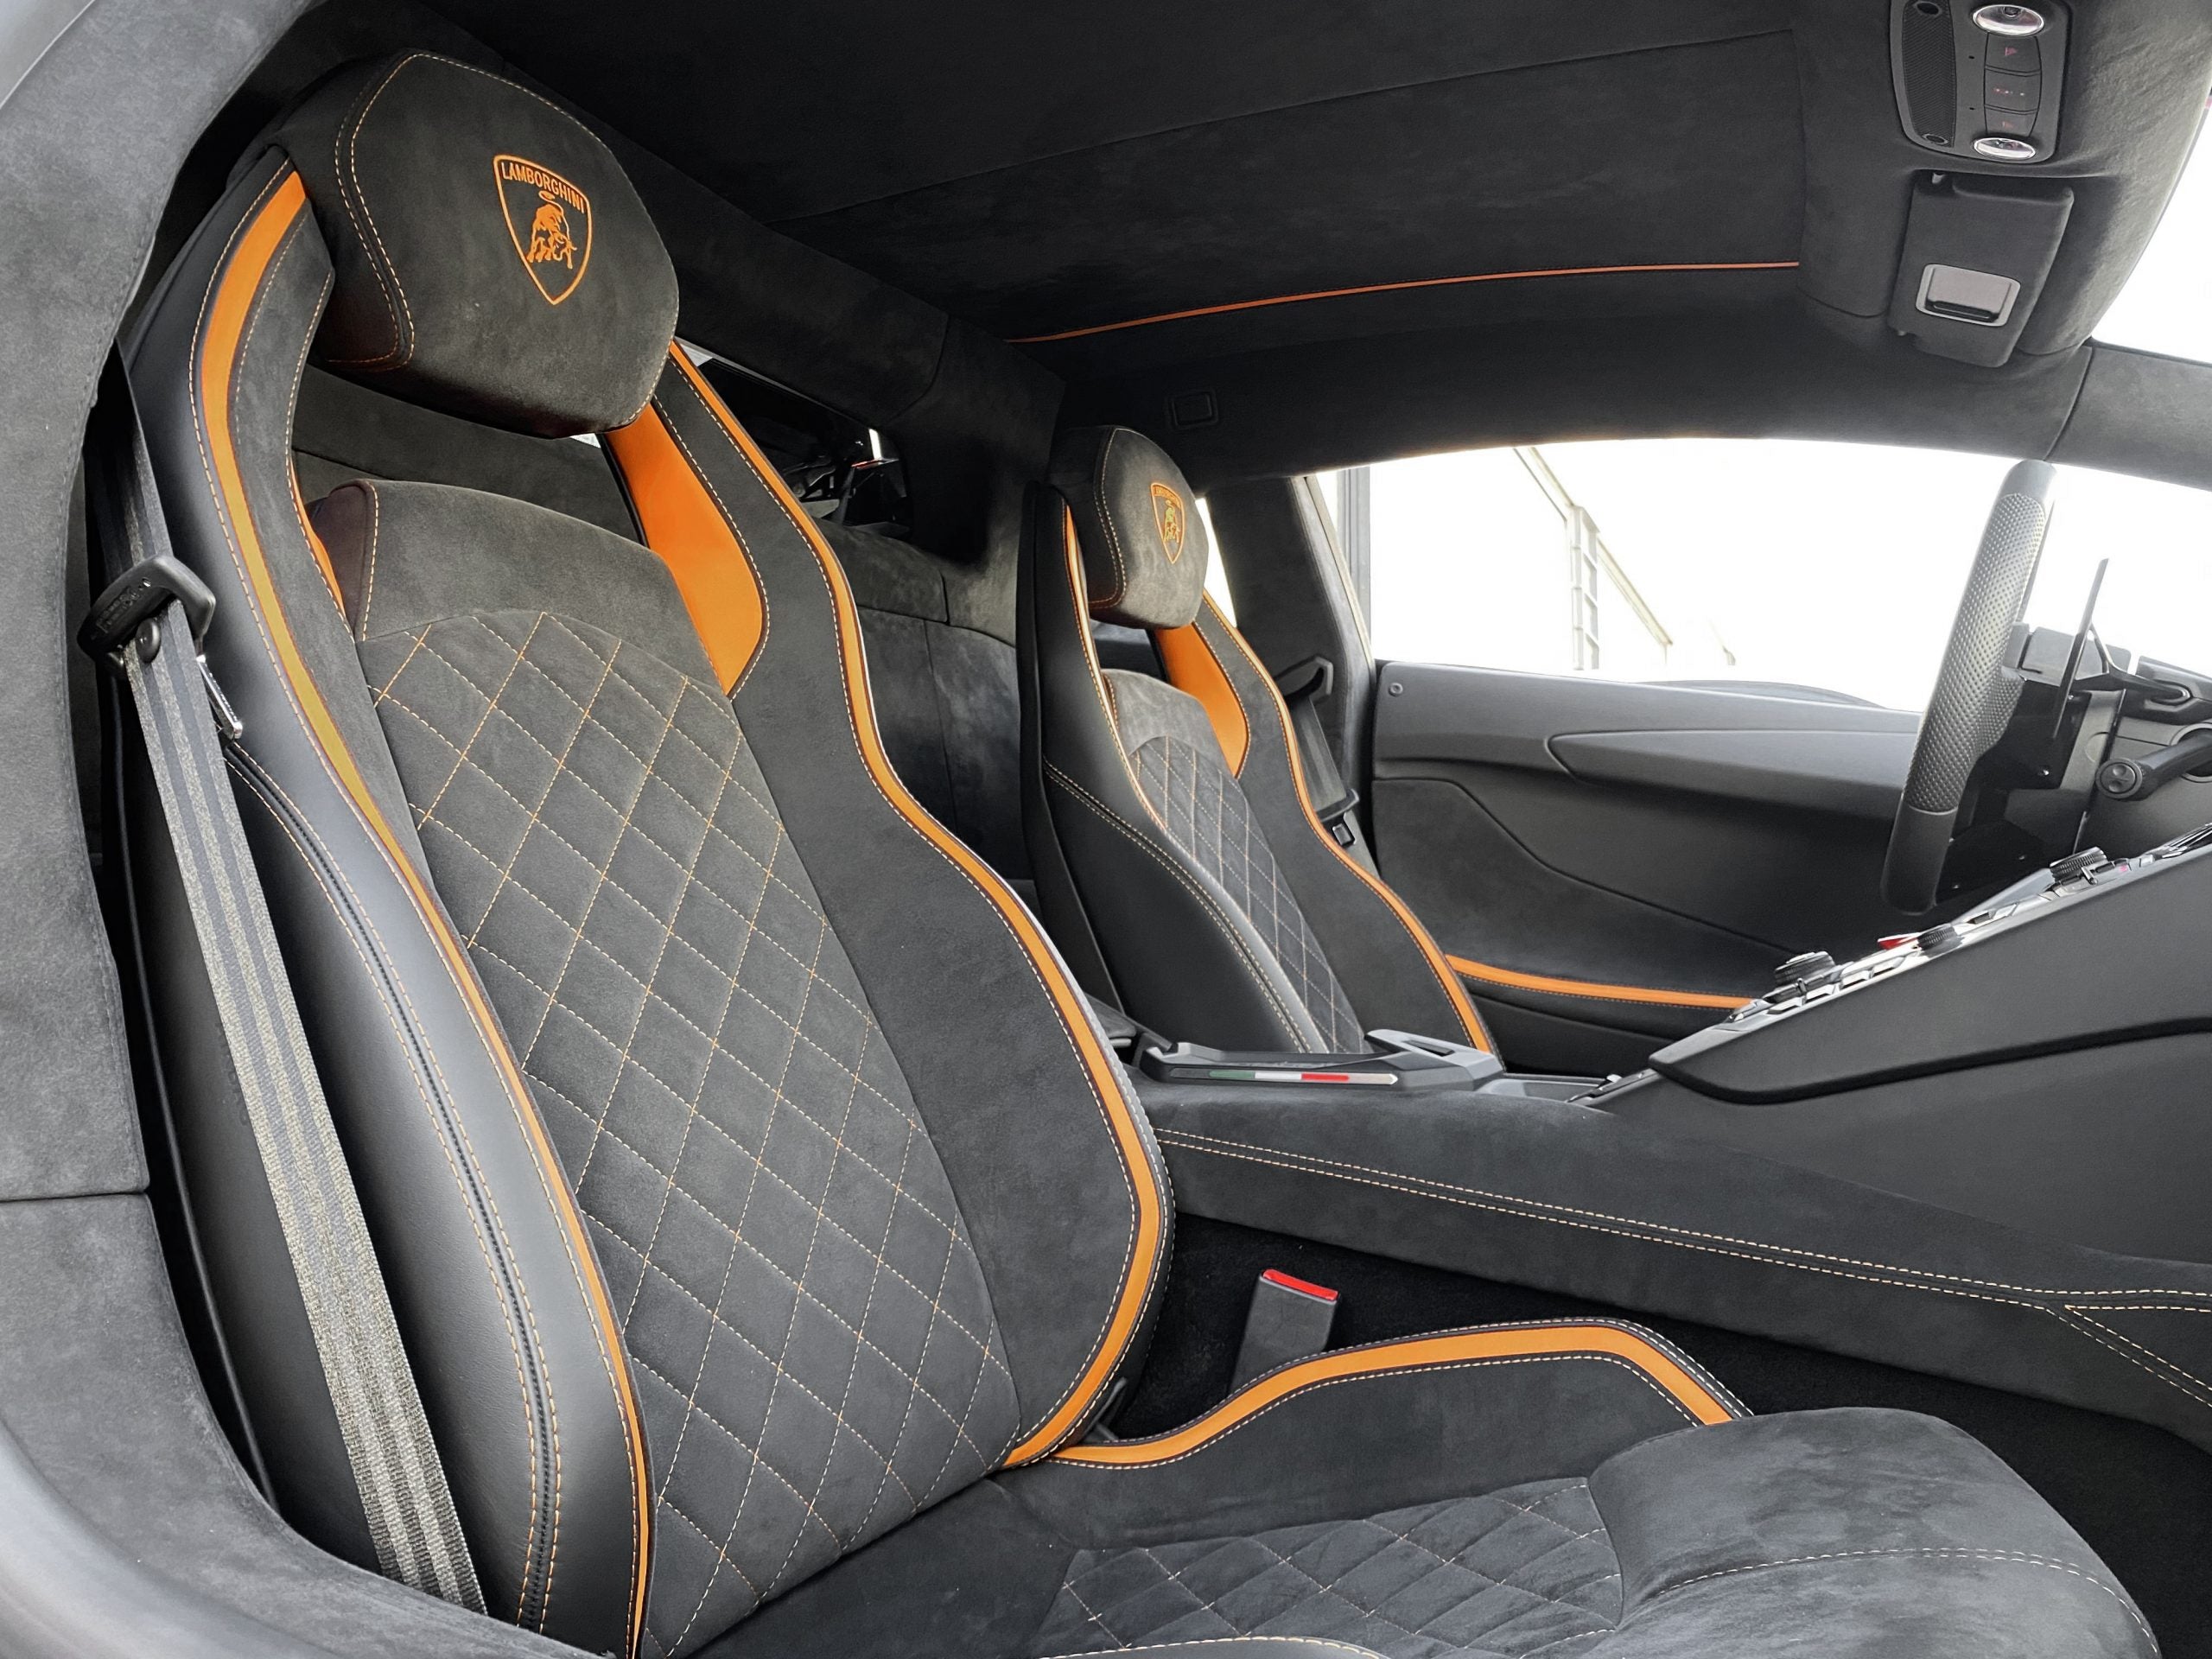 Why is Alcantara used in sports and luxury cars?